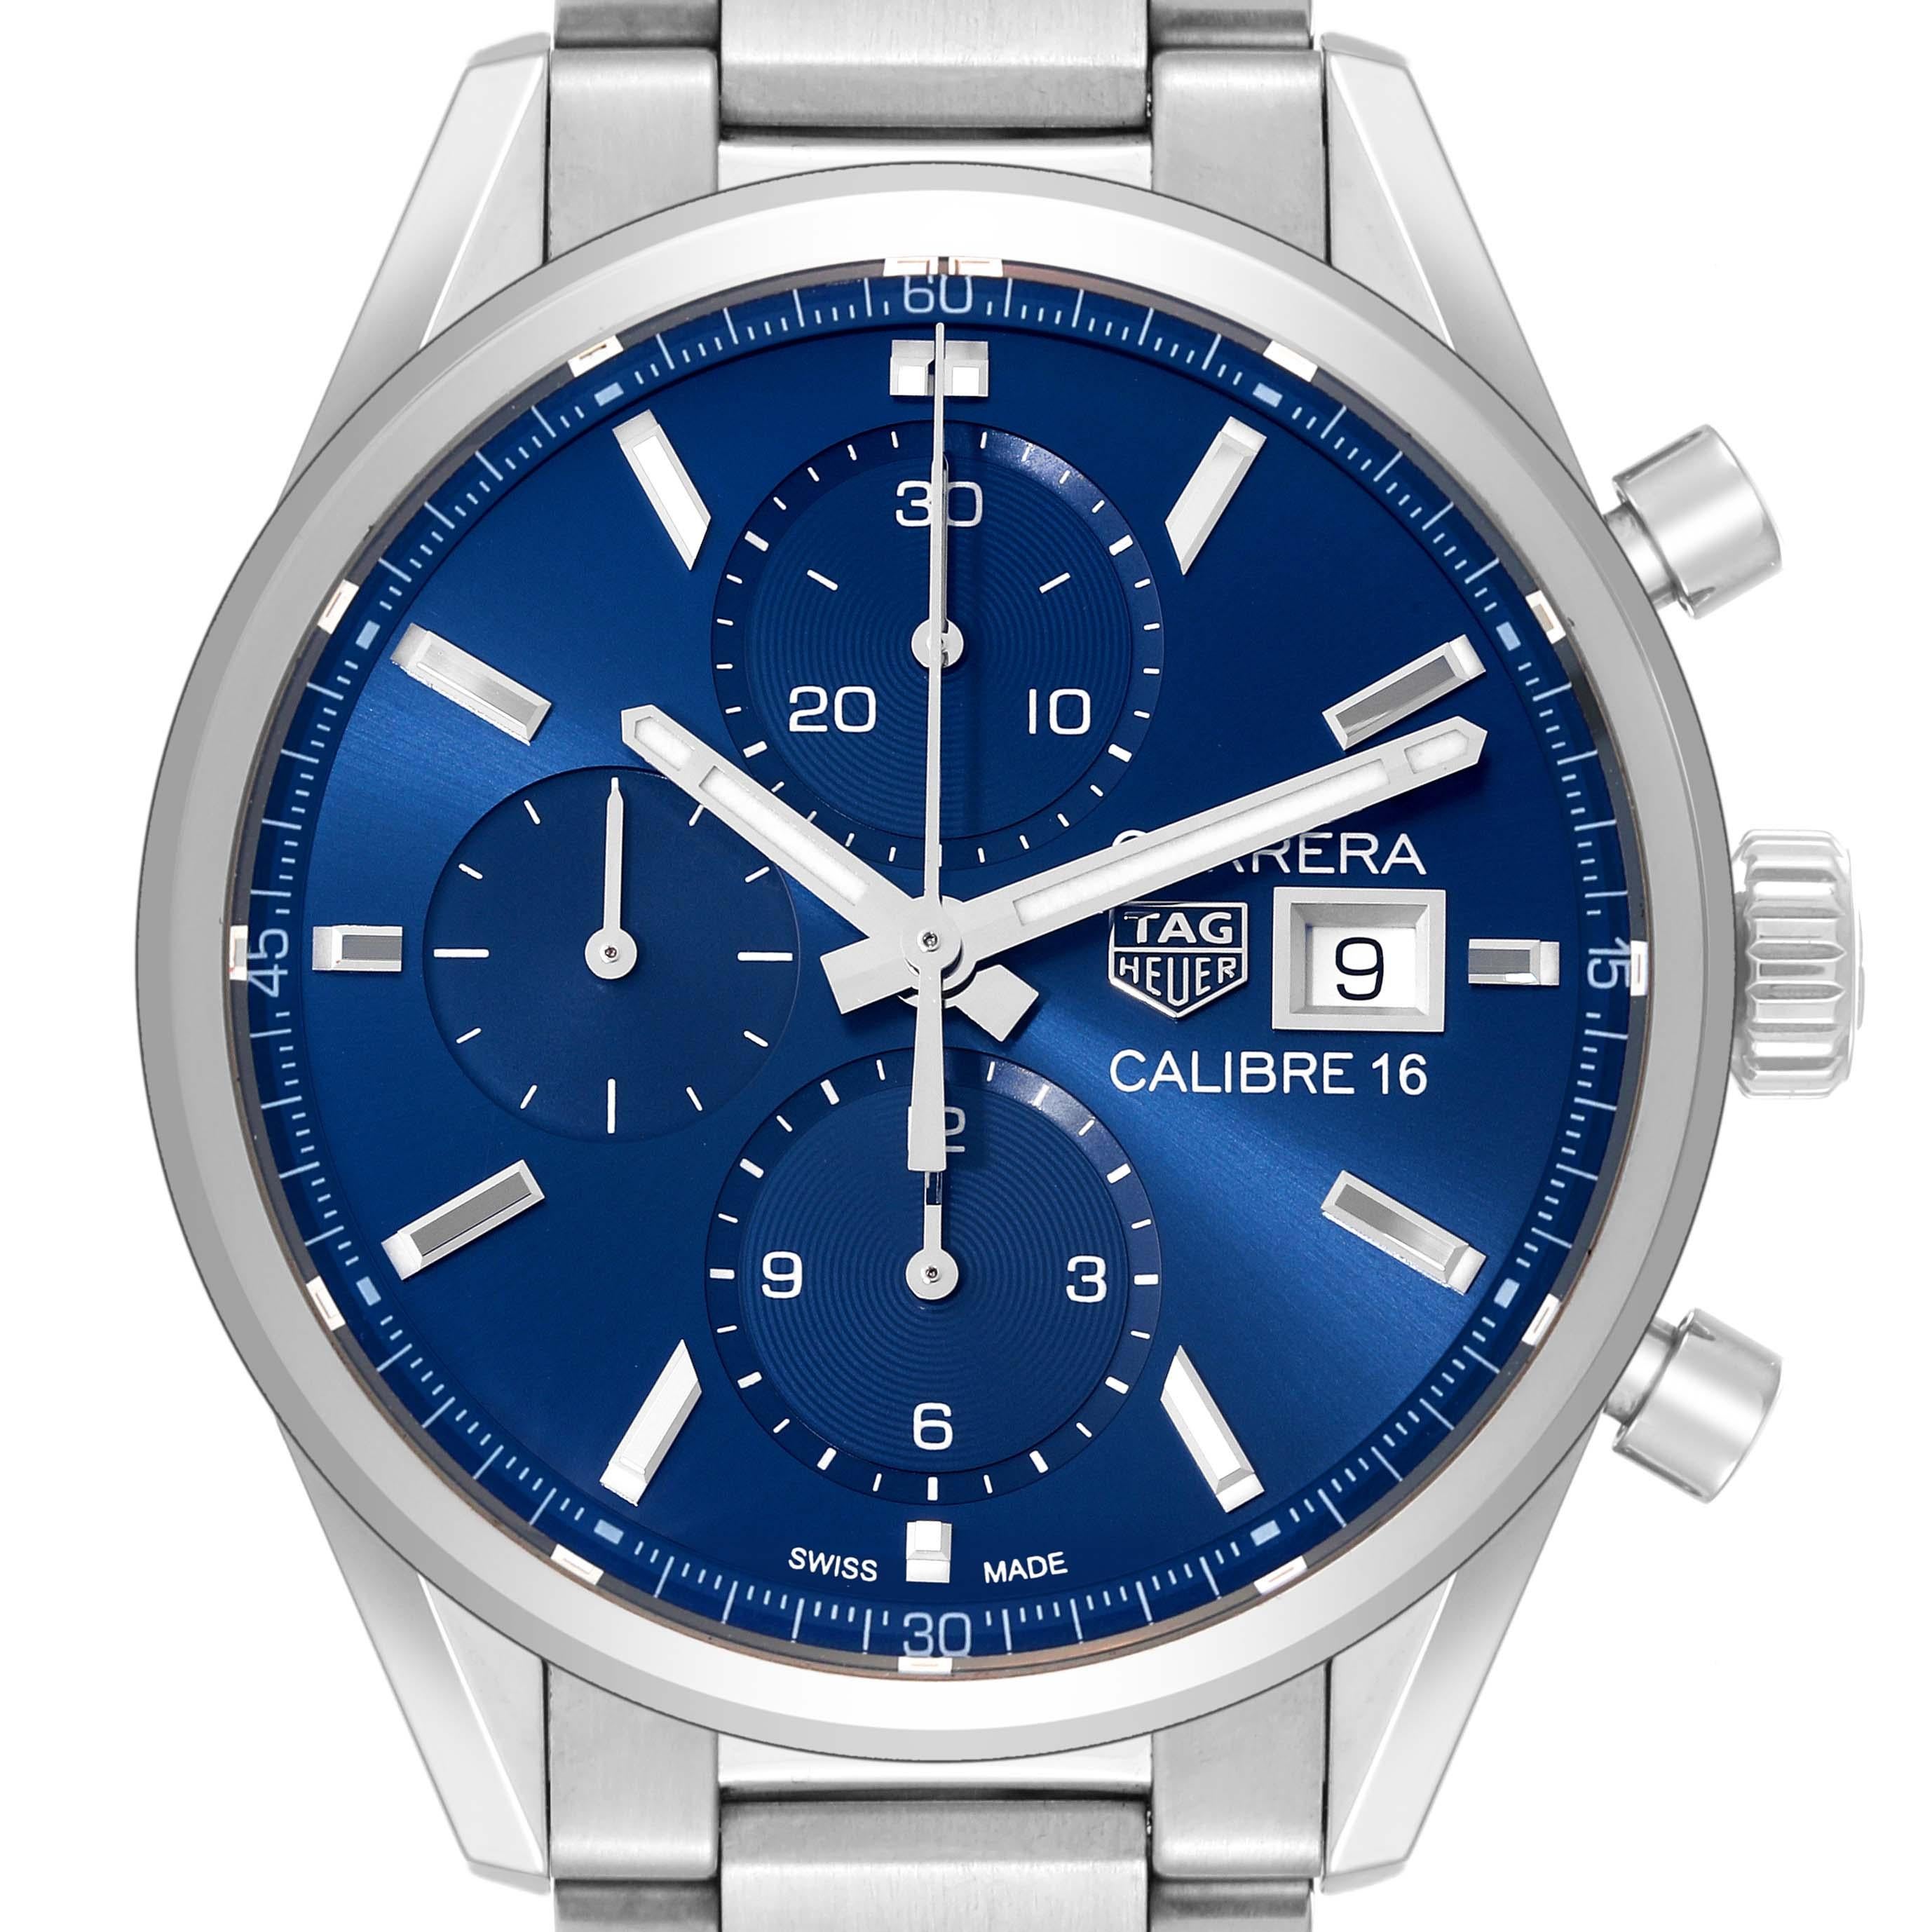 Tag Heuer Carrera Calibre 16 Chronograph Steel Mens Watch CBK2112 Box Card. Automatic self-winding chronograph movement. Stainless steel case 41.0 mm in diameter. Transparent exhibition sapphire crystal caseback. Stainless steel smooth bezel.